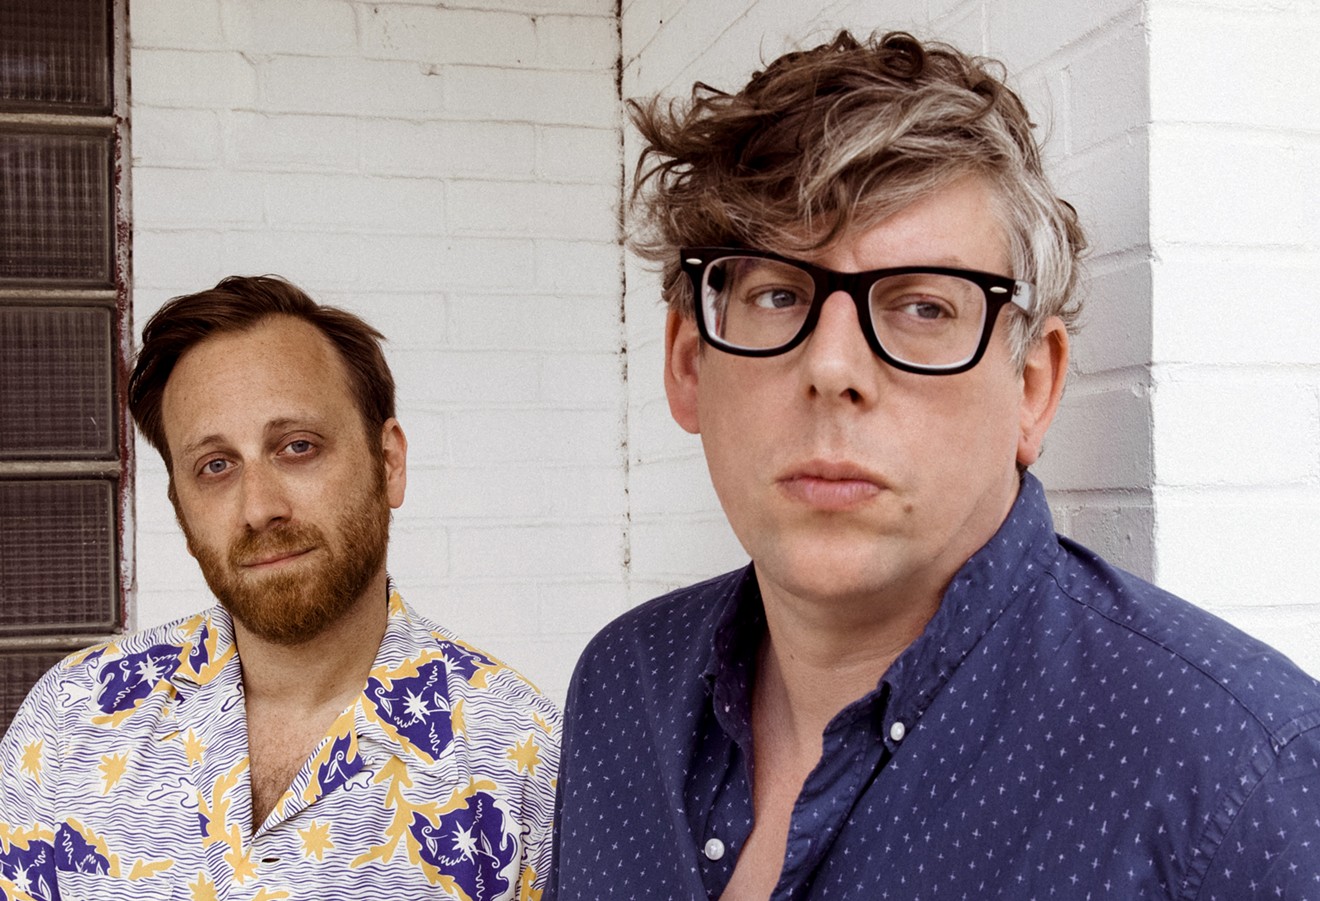 The Black Keys are scheduled to perform on Saturday, November 16, at Talking Stick Resort Arena.